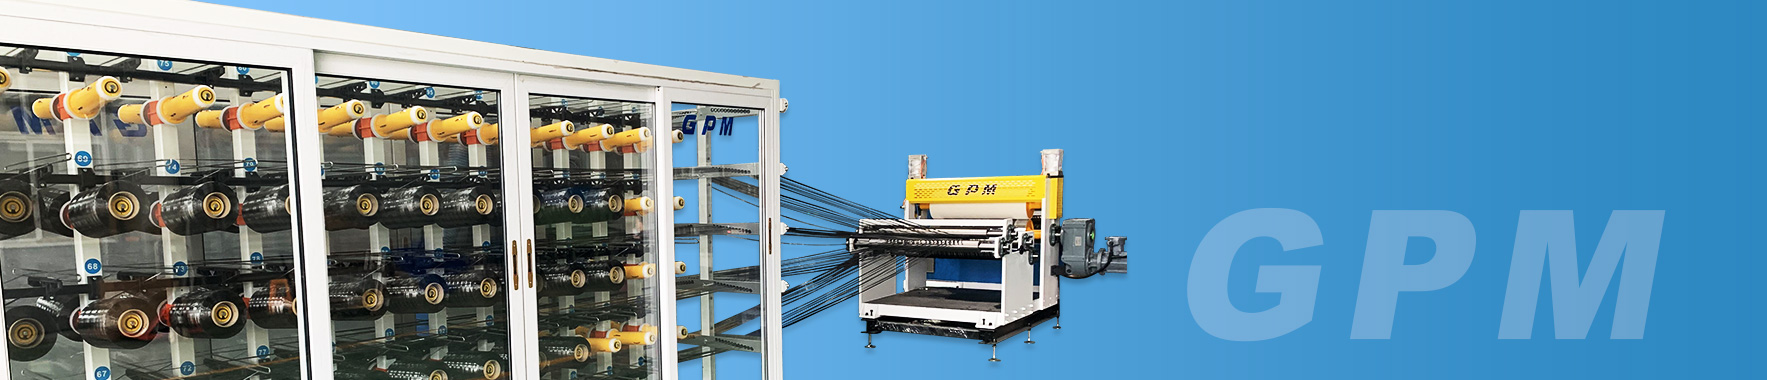 Double Belt Presses Machinery For Processing bamboo fibers Reinforced composite laminates；